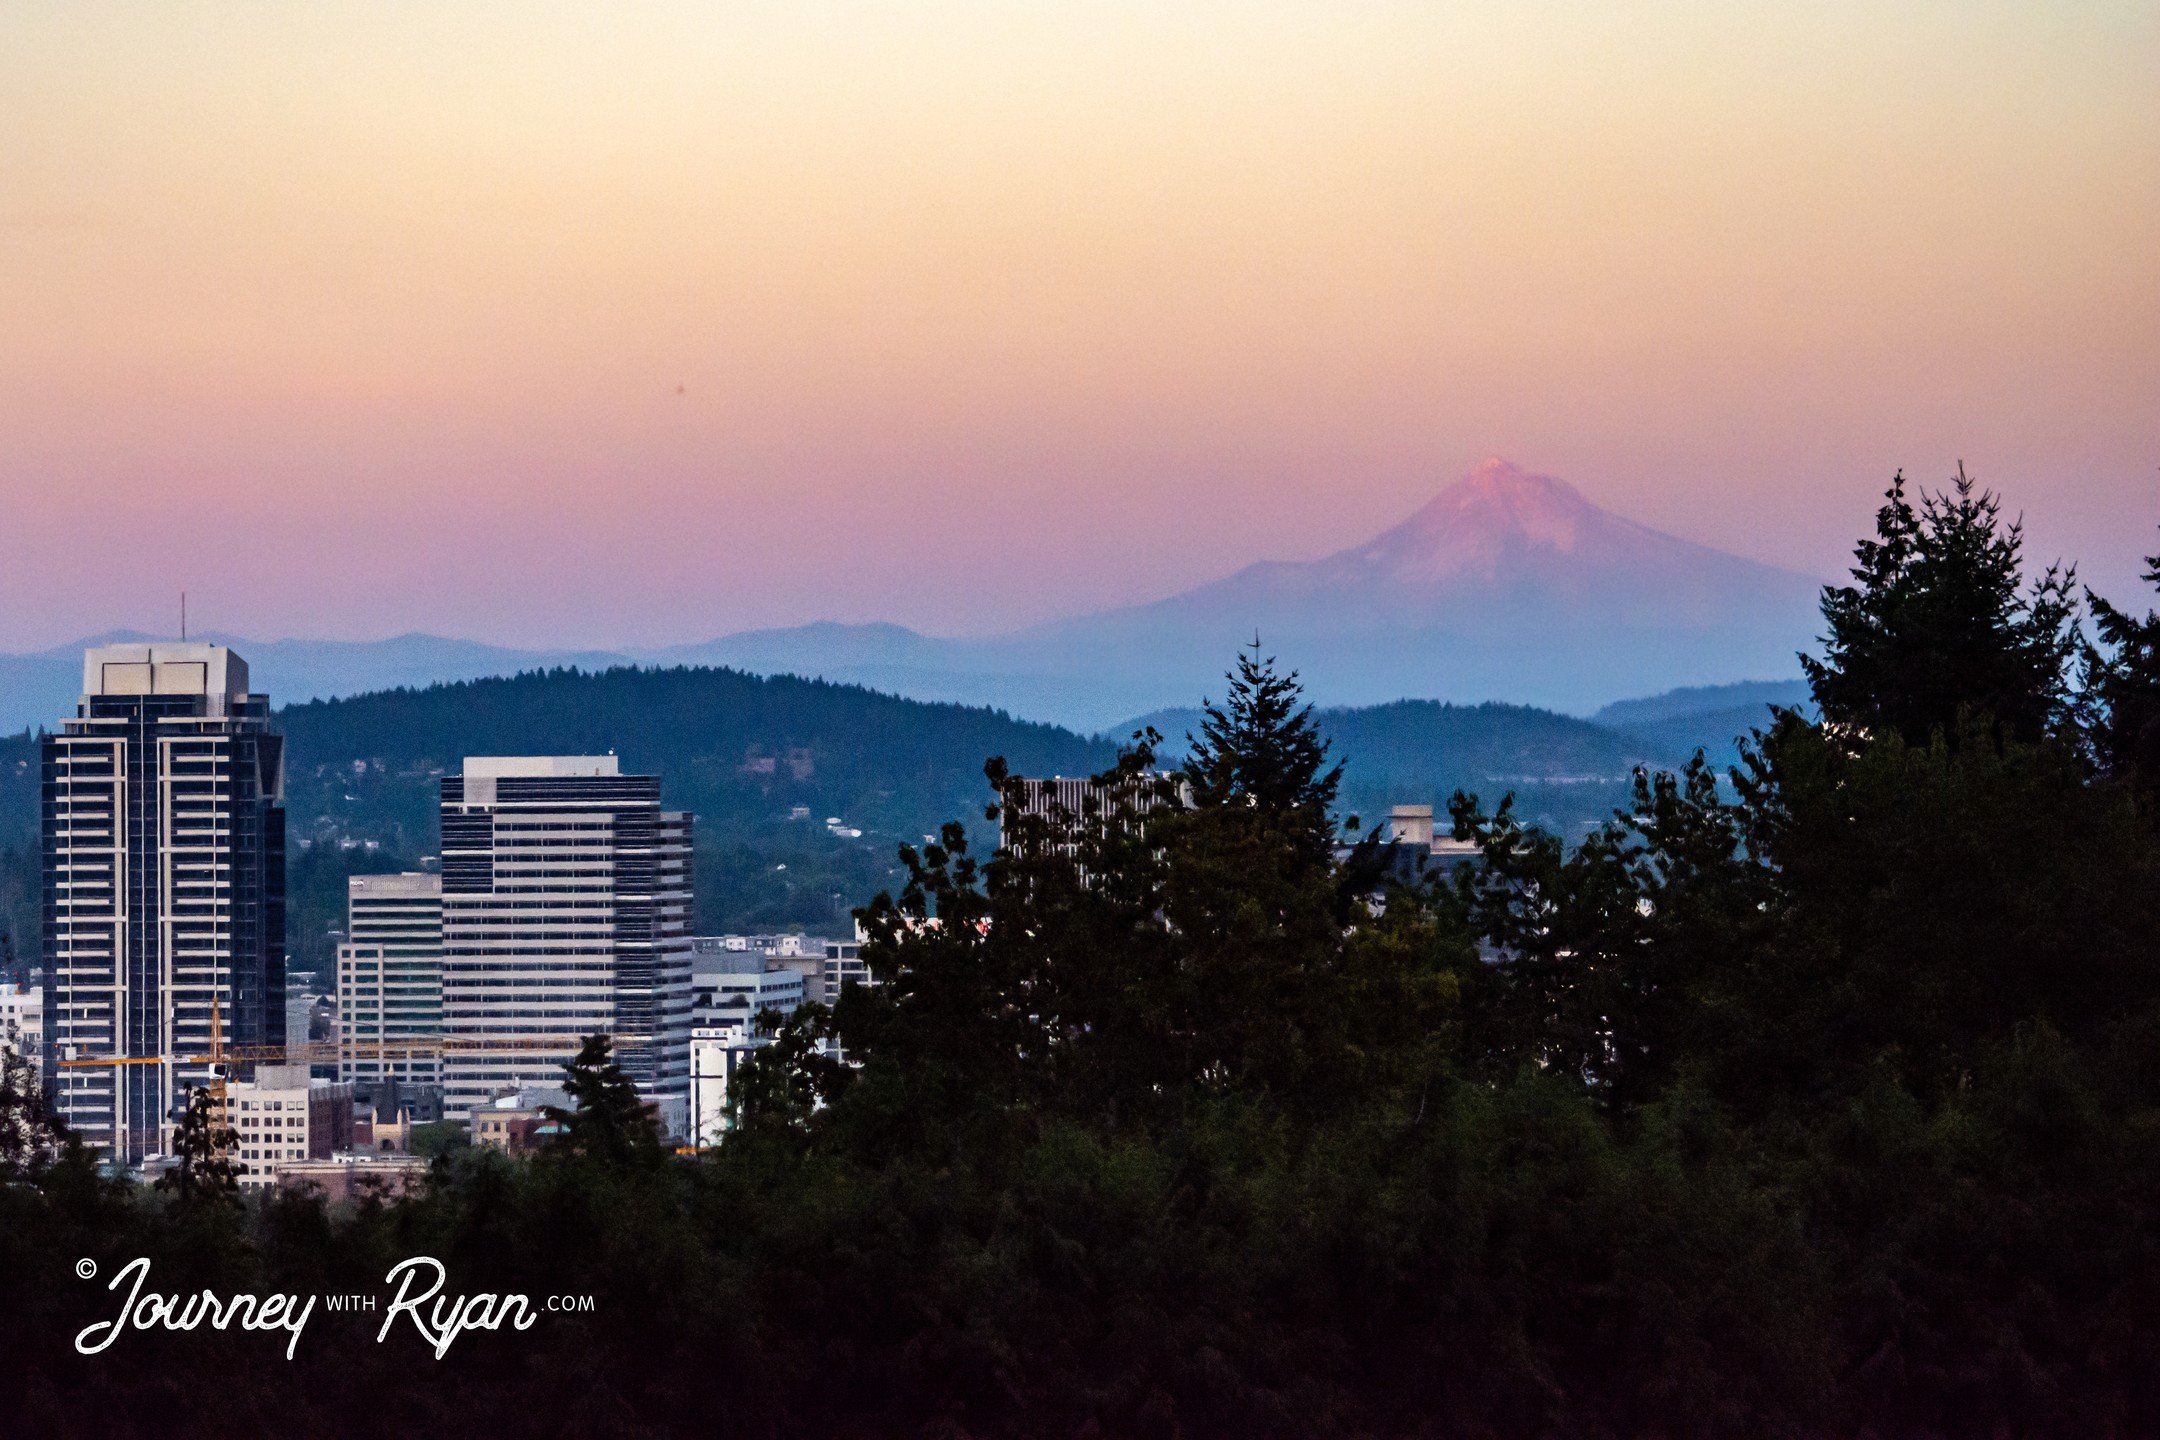 Mount Hood 🏔️
.
Great view of Mount Hood over Portland at sunset. It has been a few years since I snapped this photo and I'd love to go back and do it again.
.
Shot at @portlandrosegardens
.
📷 #nikond5200
.
#journeywithryan #oregon #portland #portl